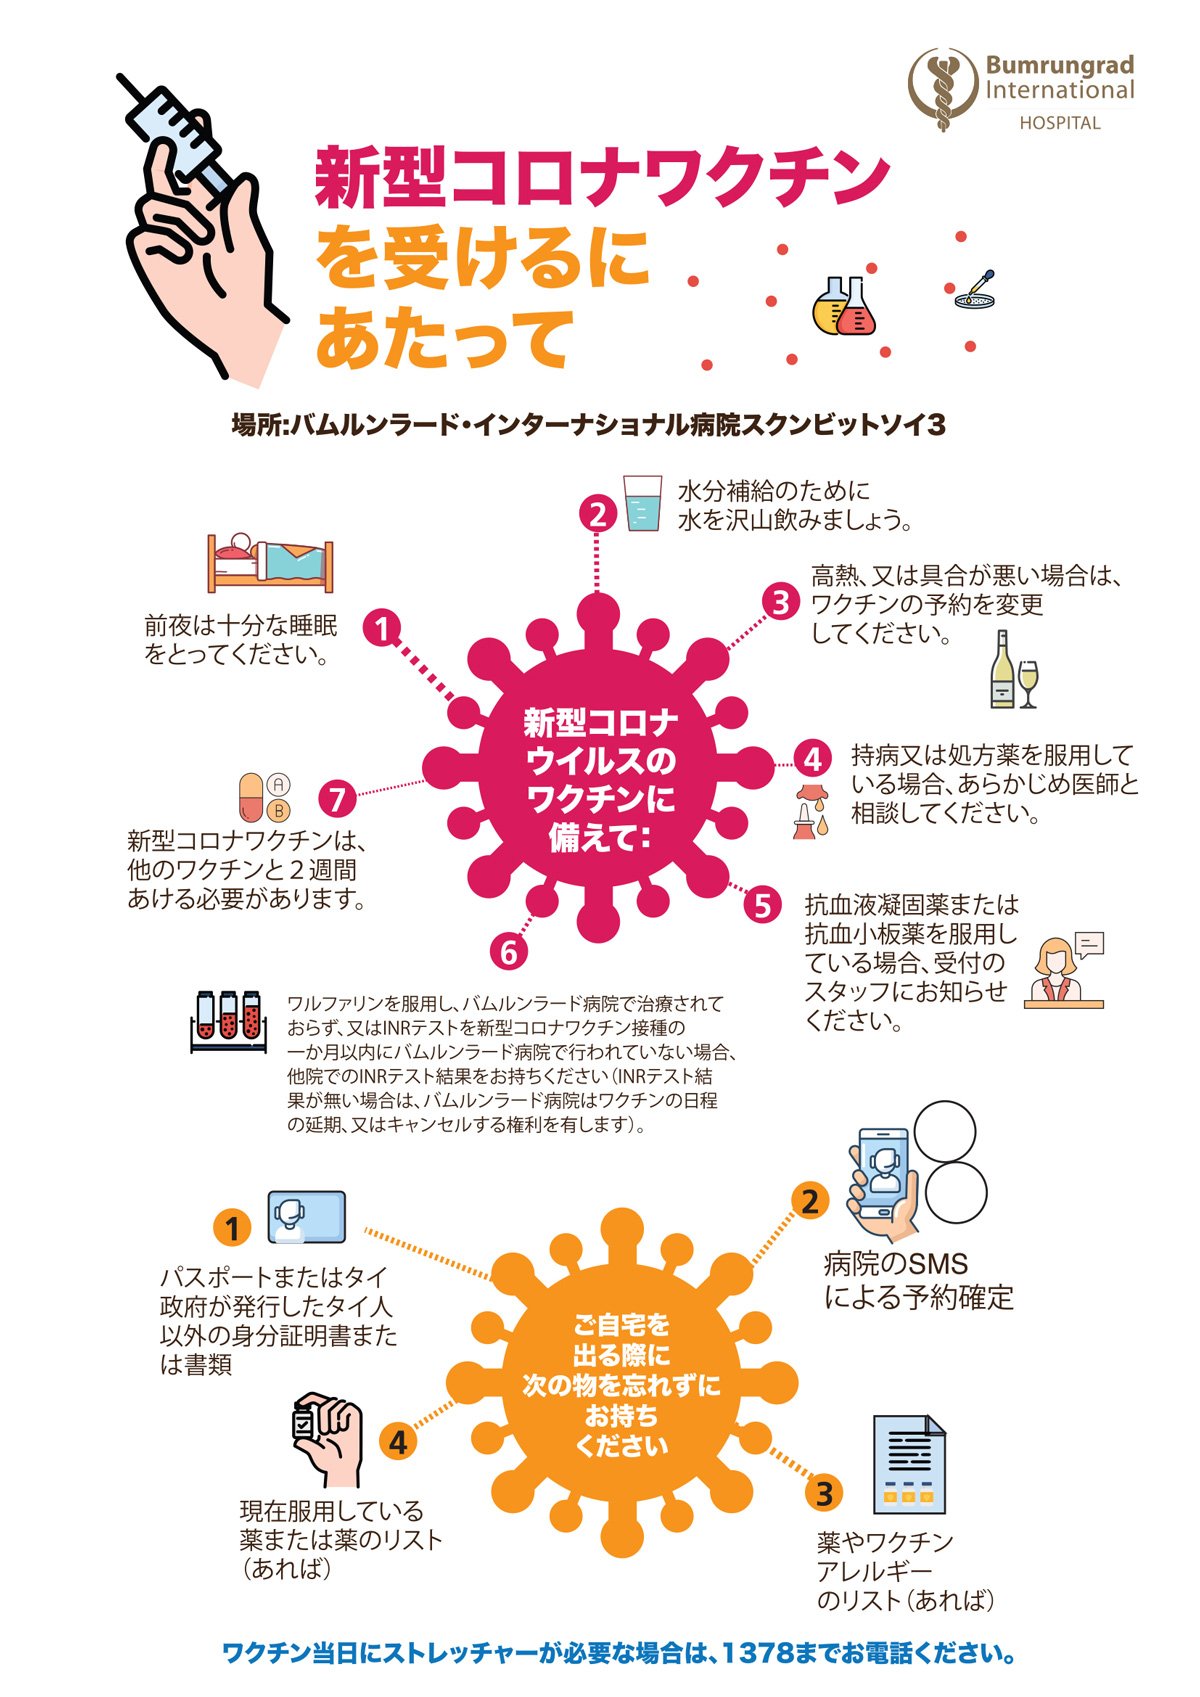 Getting-Your-Covid-19-Vaccination-info_JP-01.jpg